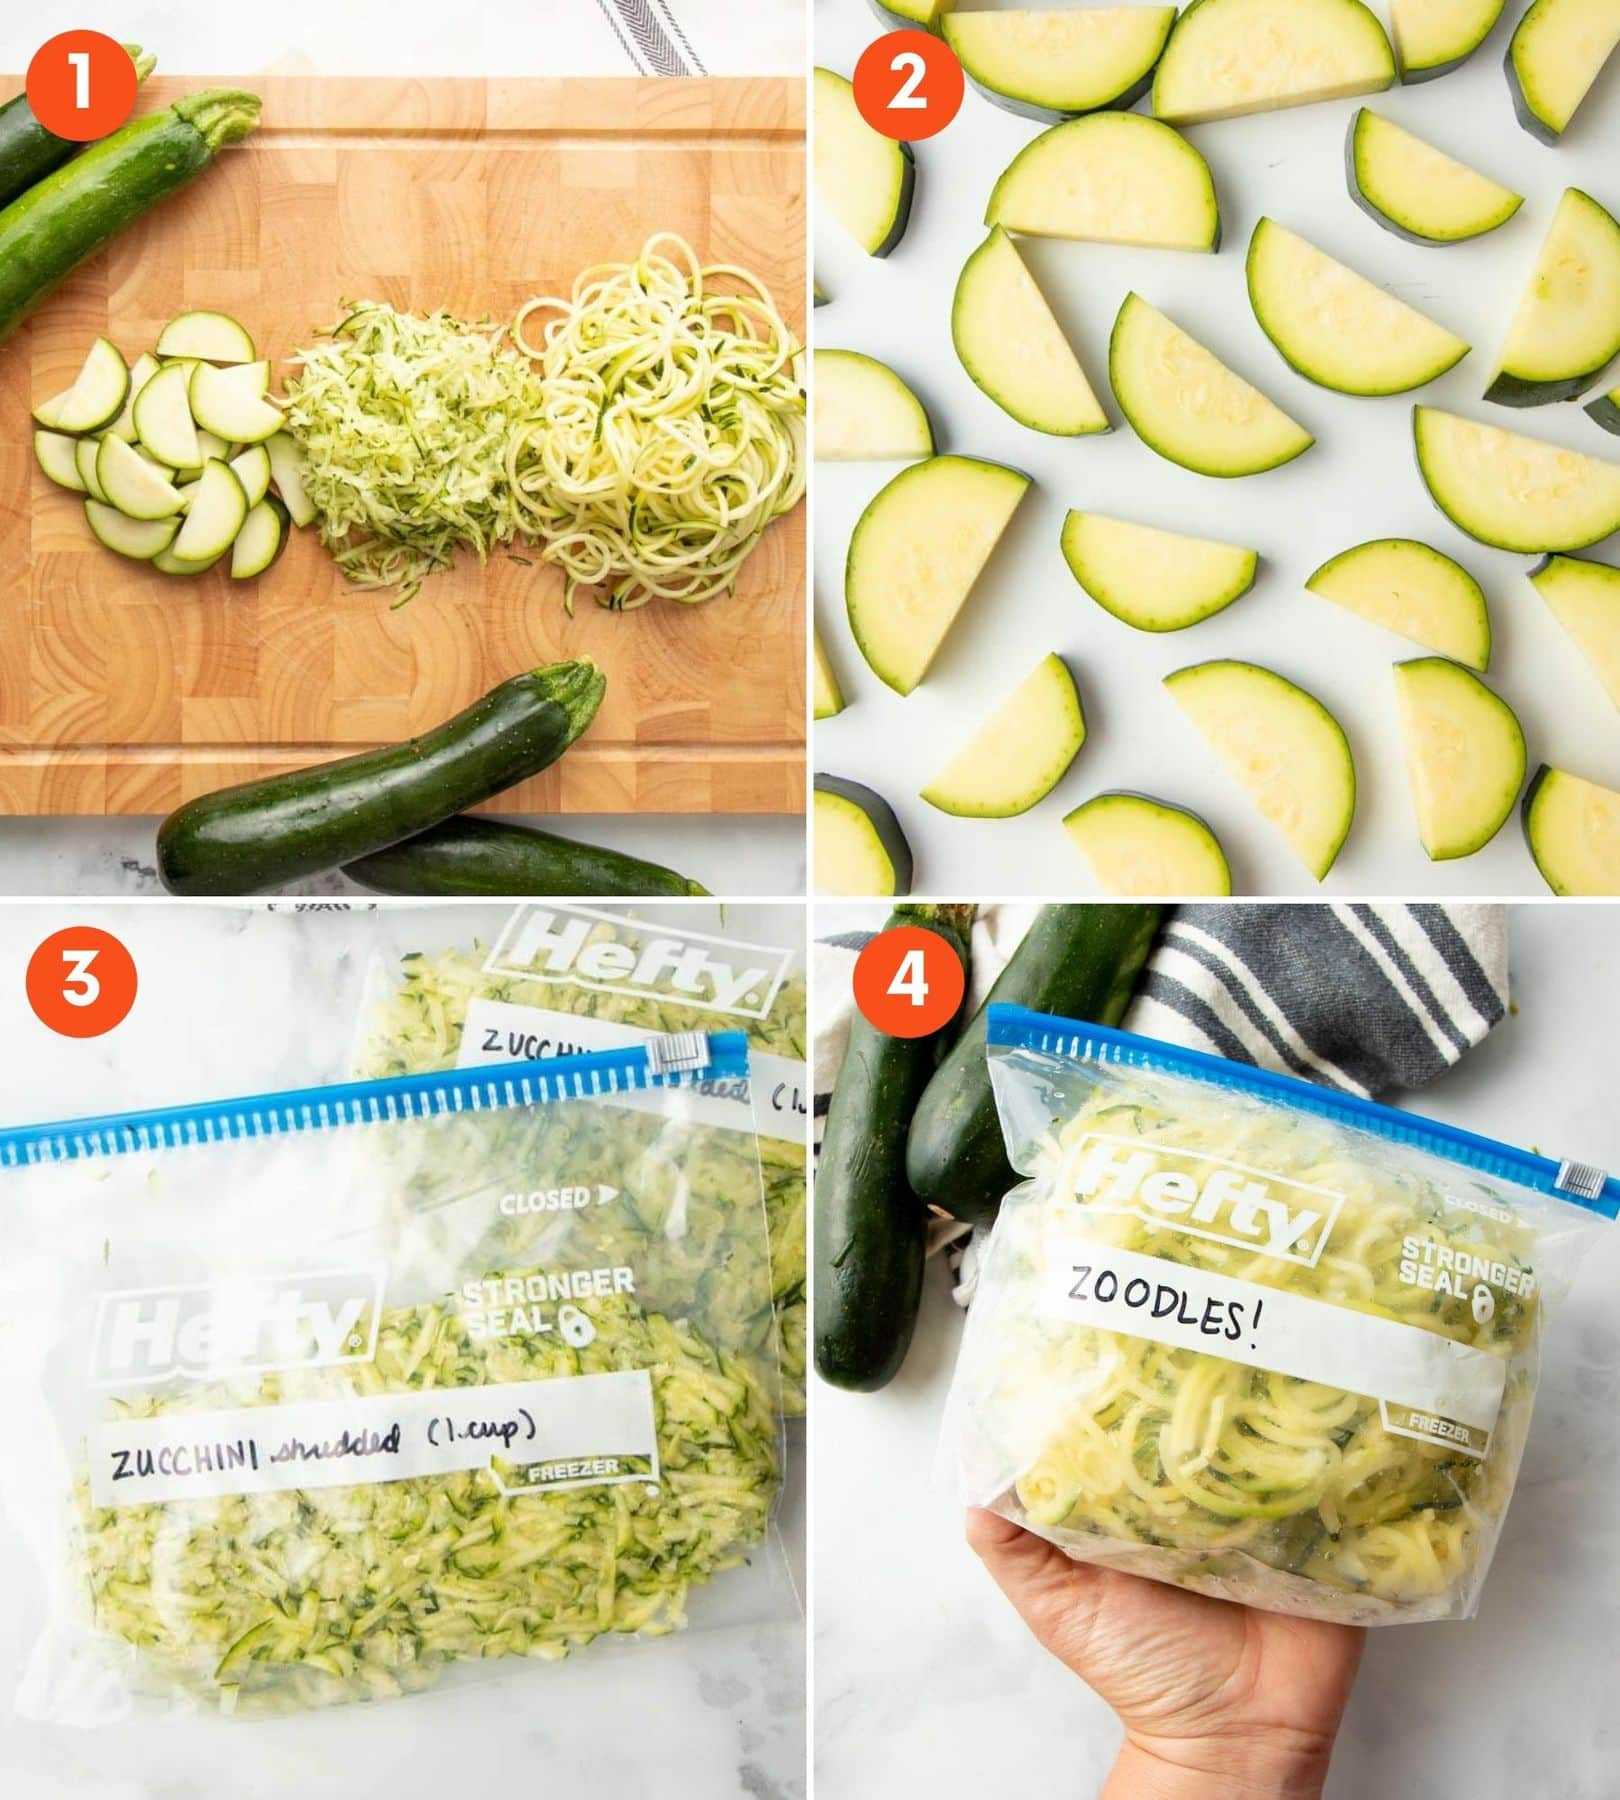 A collage of images showing three different ways to freeze zucchini.